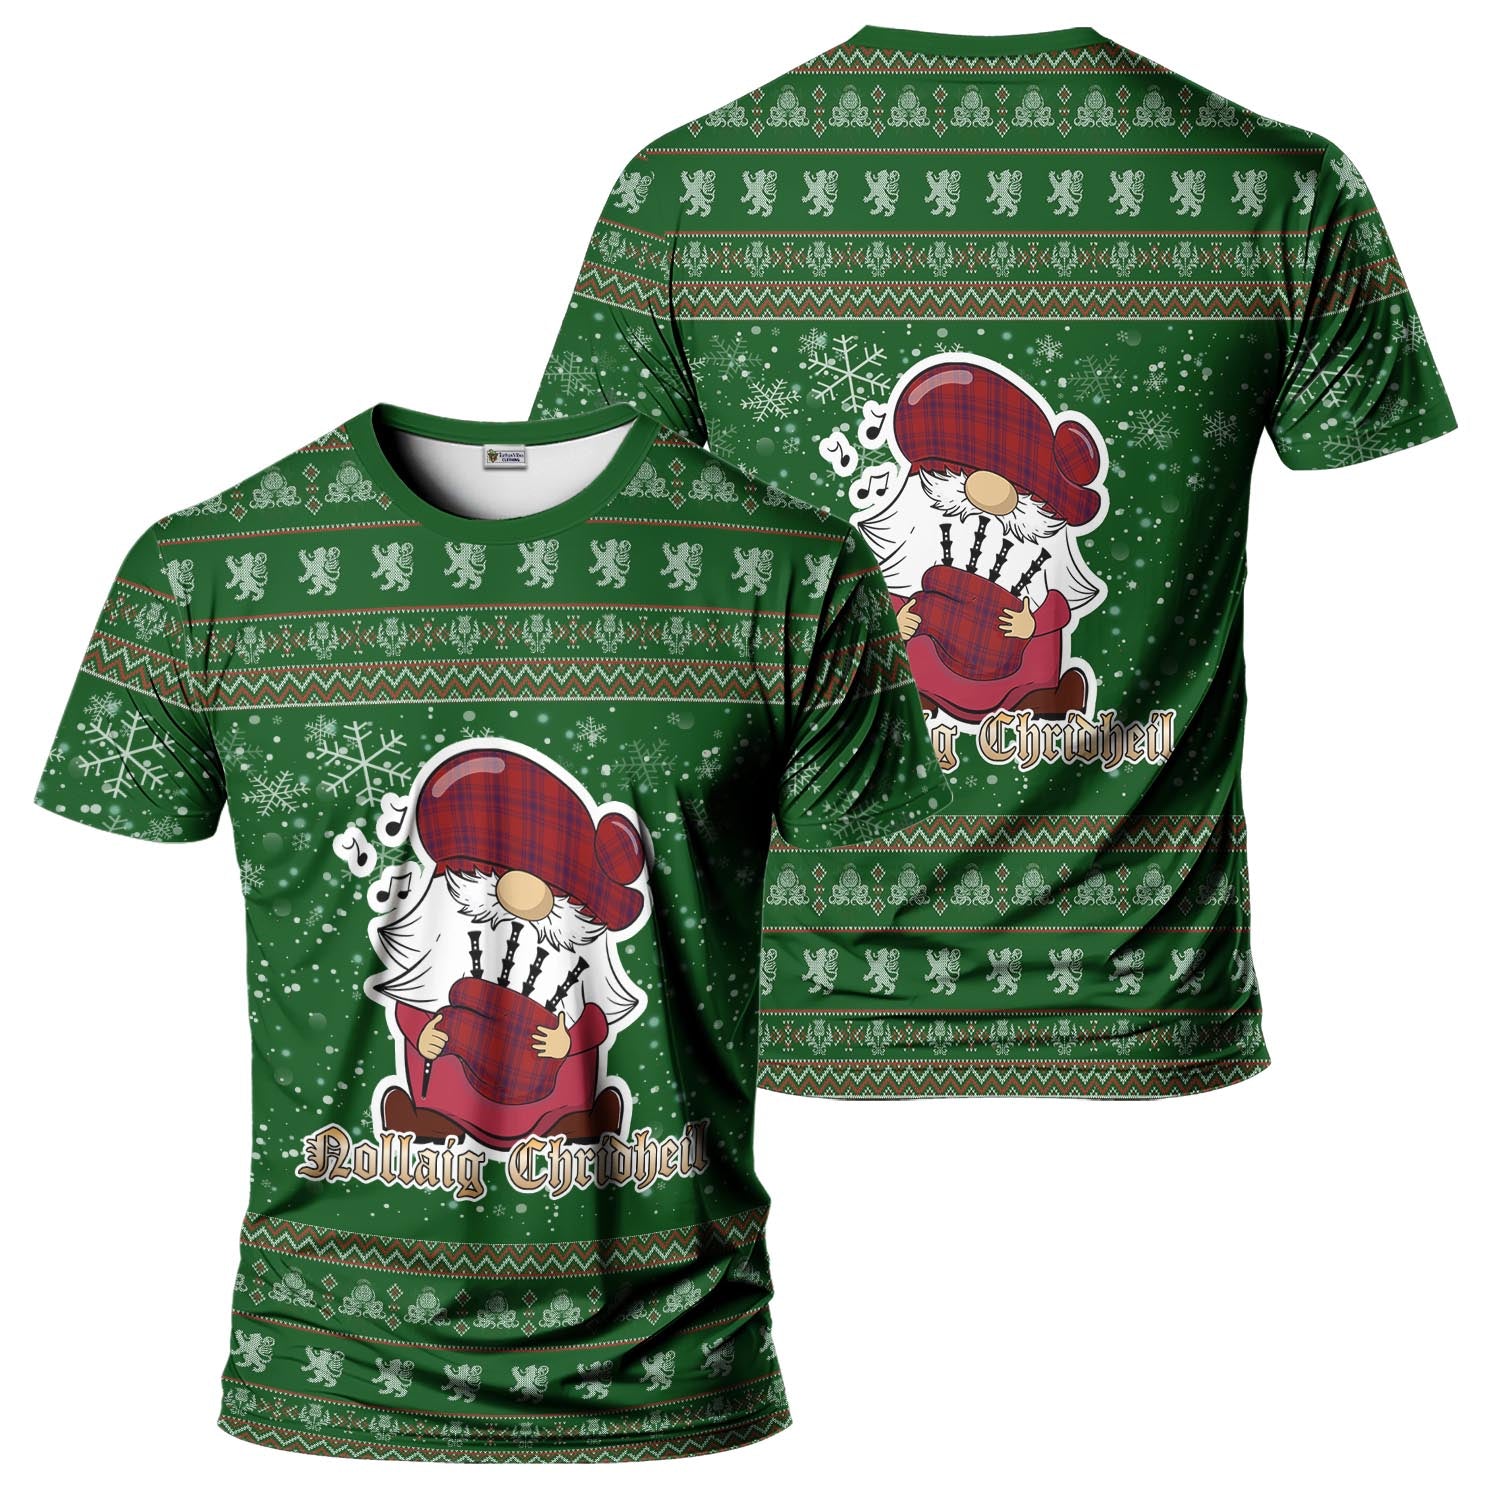 Kyle Clan Christmas Family T-Shirt with Funny Gnome Playing Bagpipes Men's Shirt Green - Tartanvibesclothing